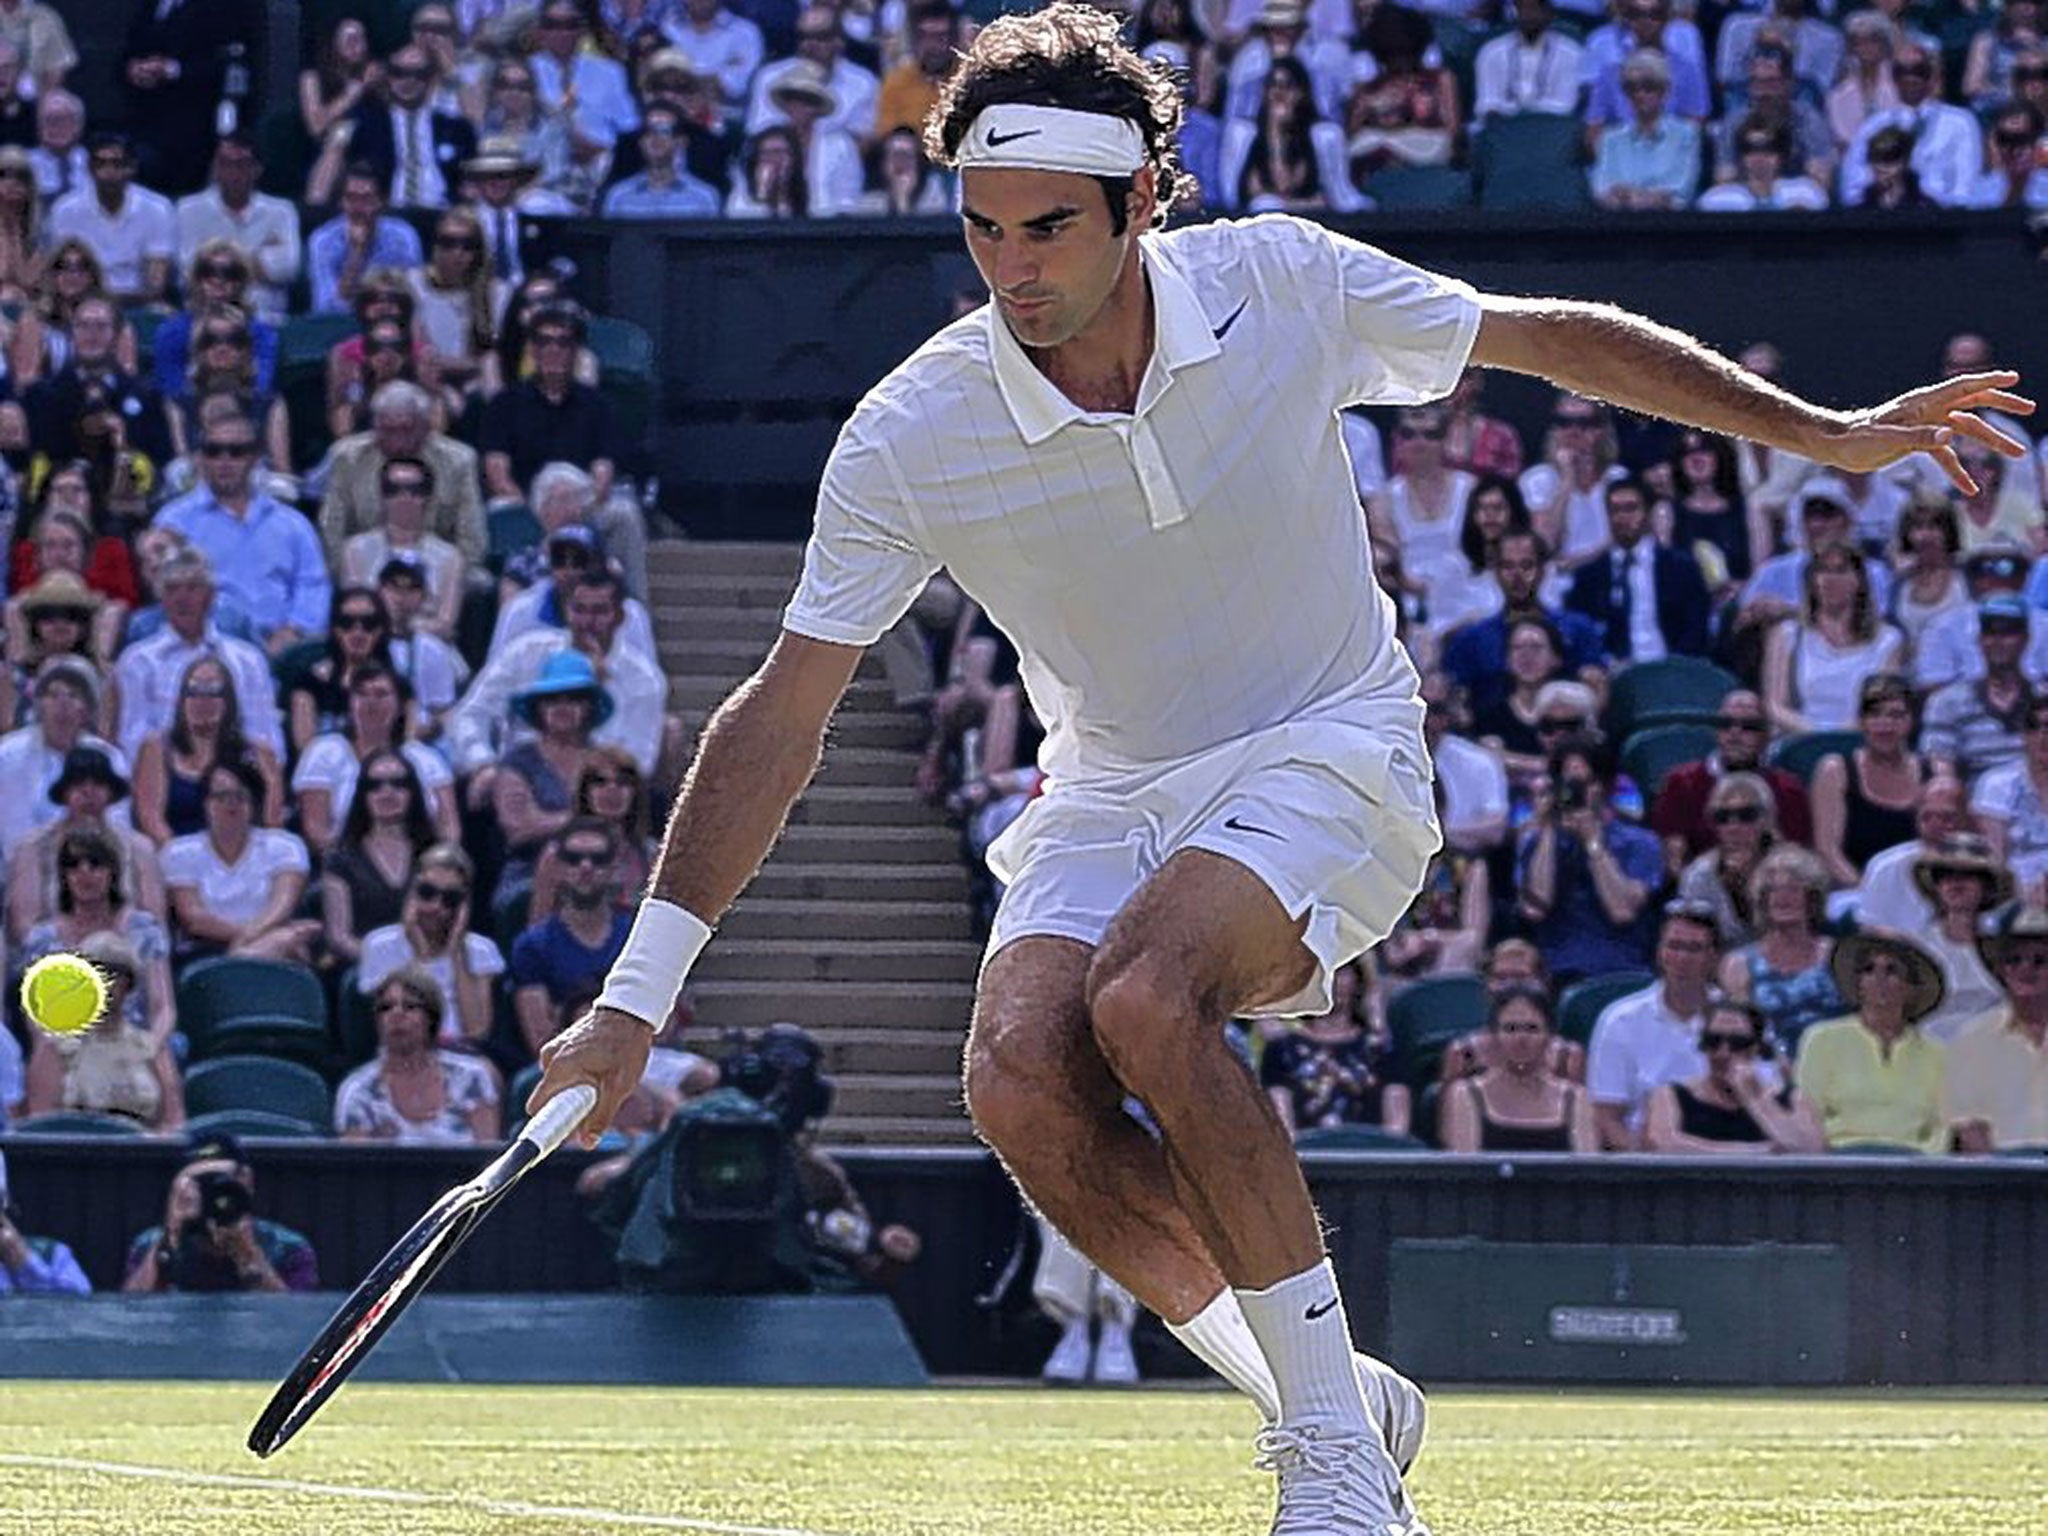 Roger Federer on his way to a straight-sets semi-final victory over Milos Raonic yesterday